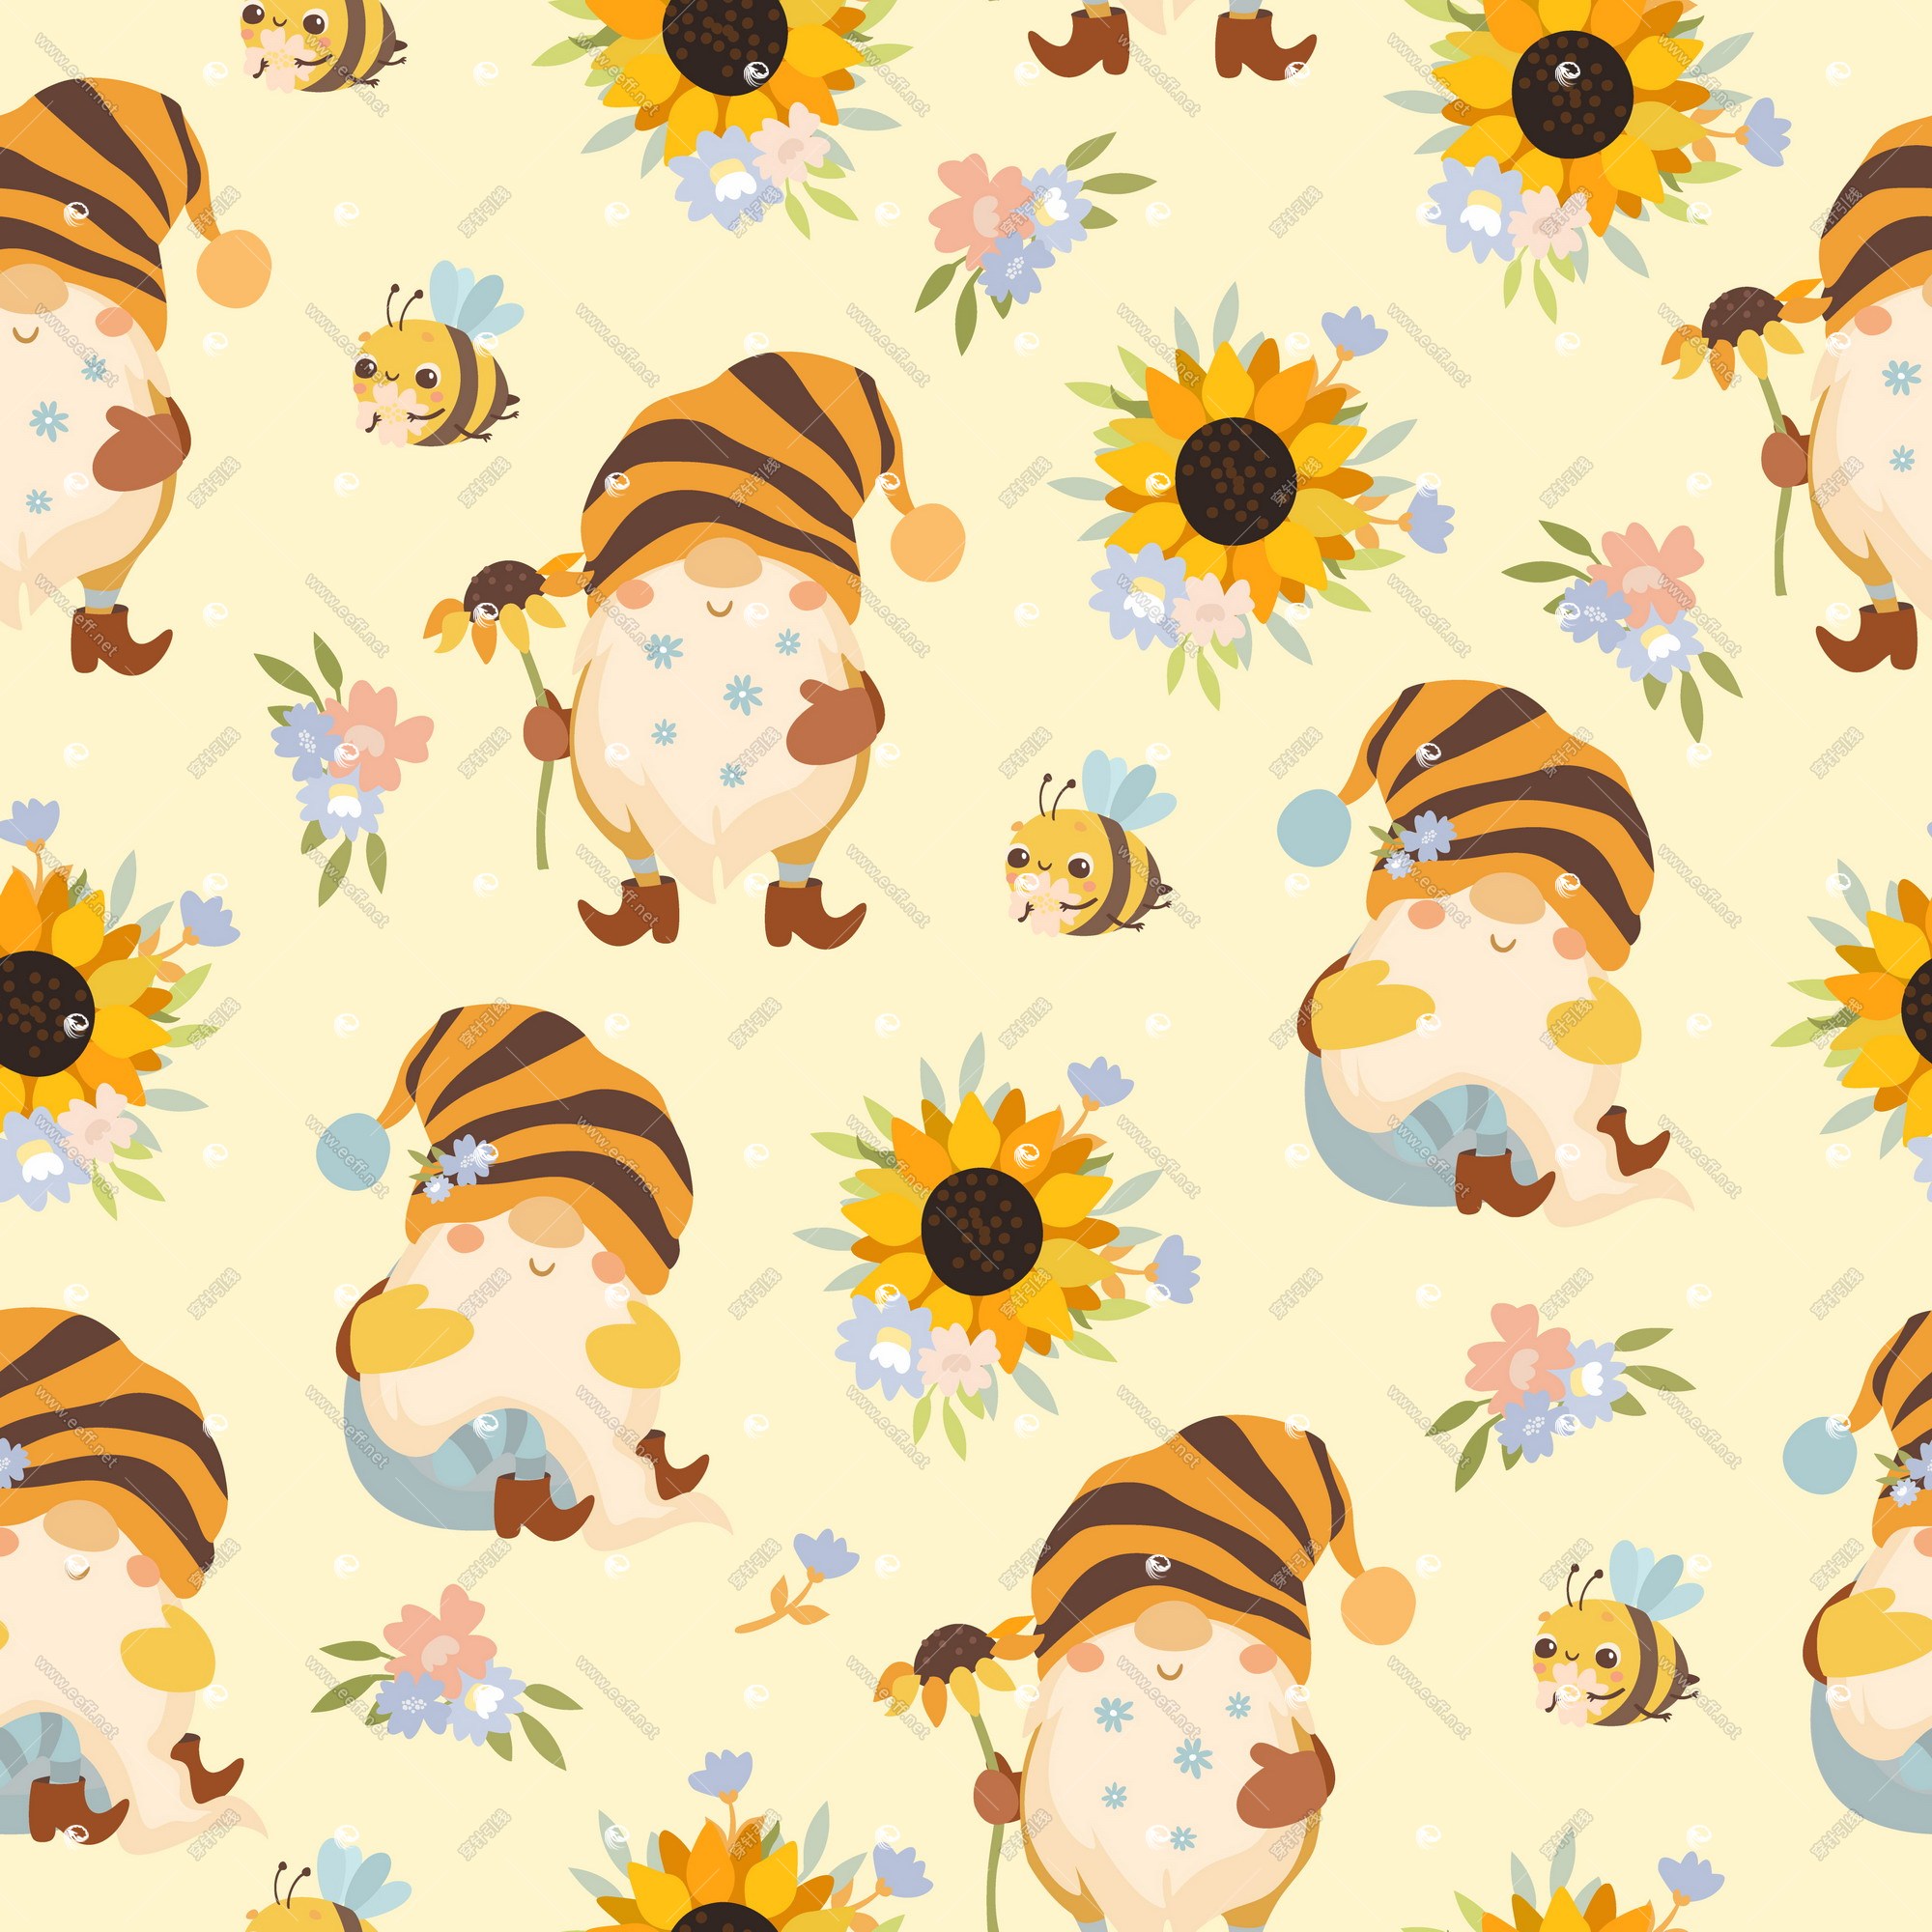 gnomes_and_bees_pattern-1